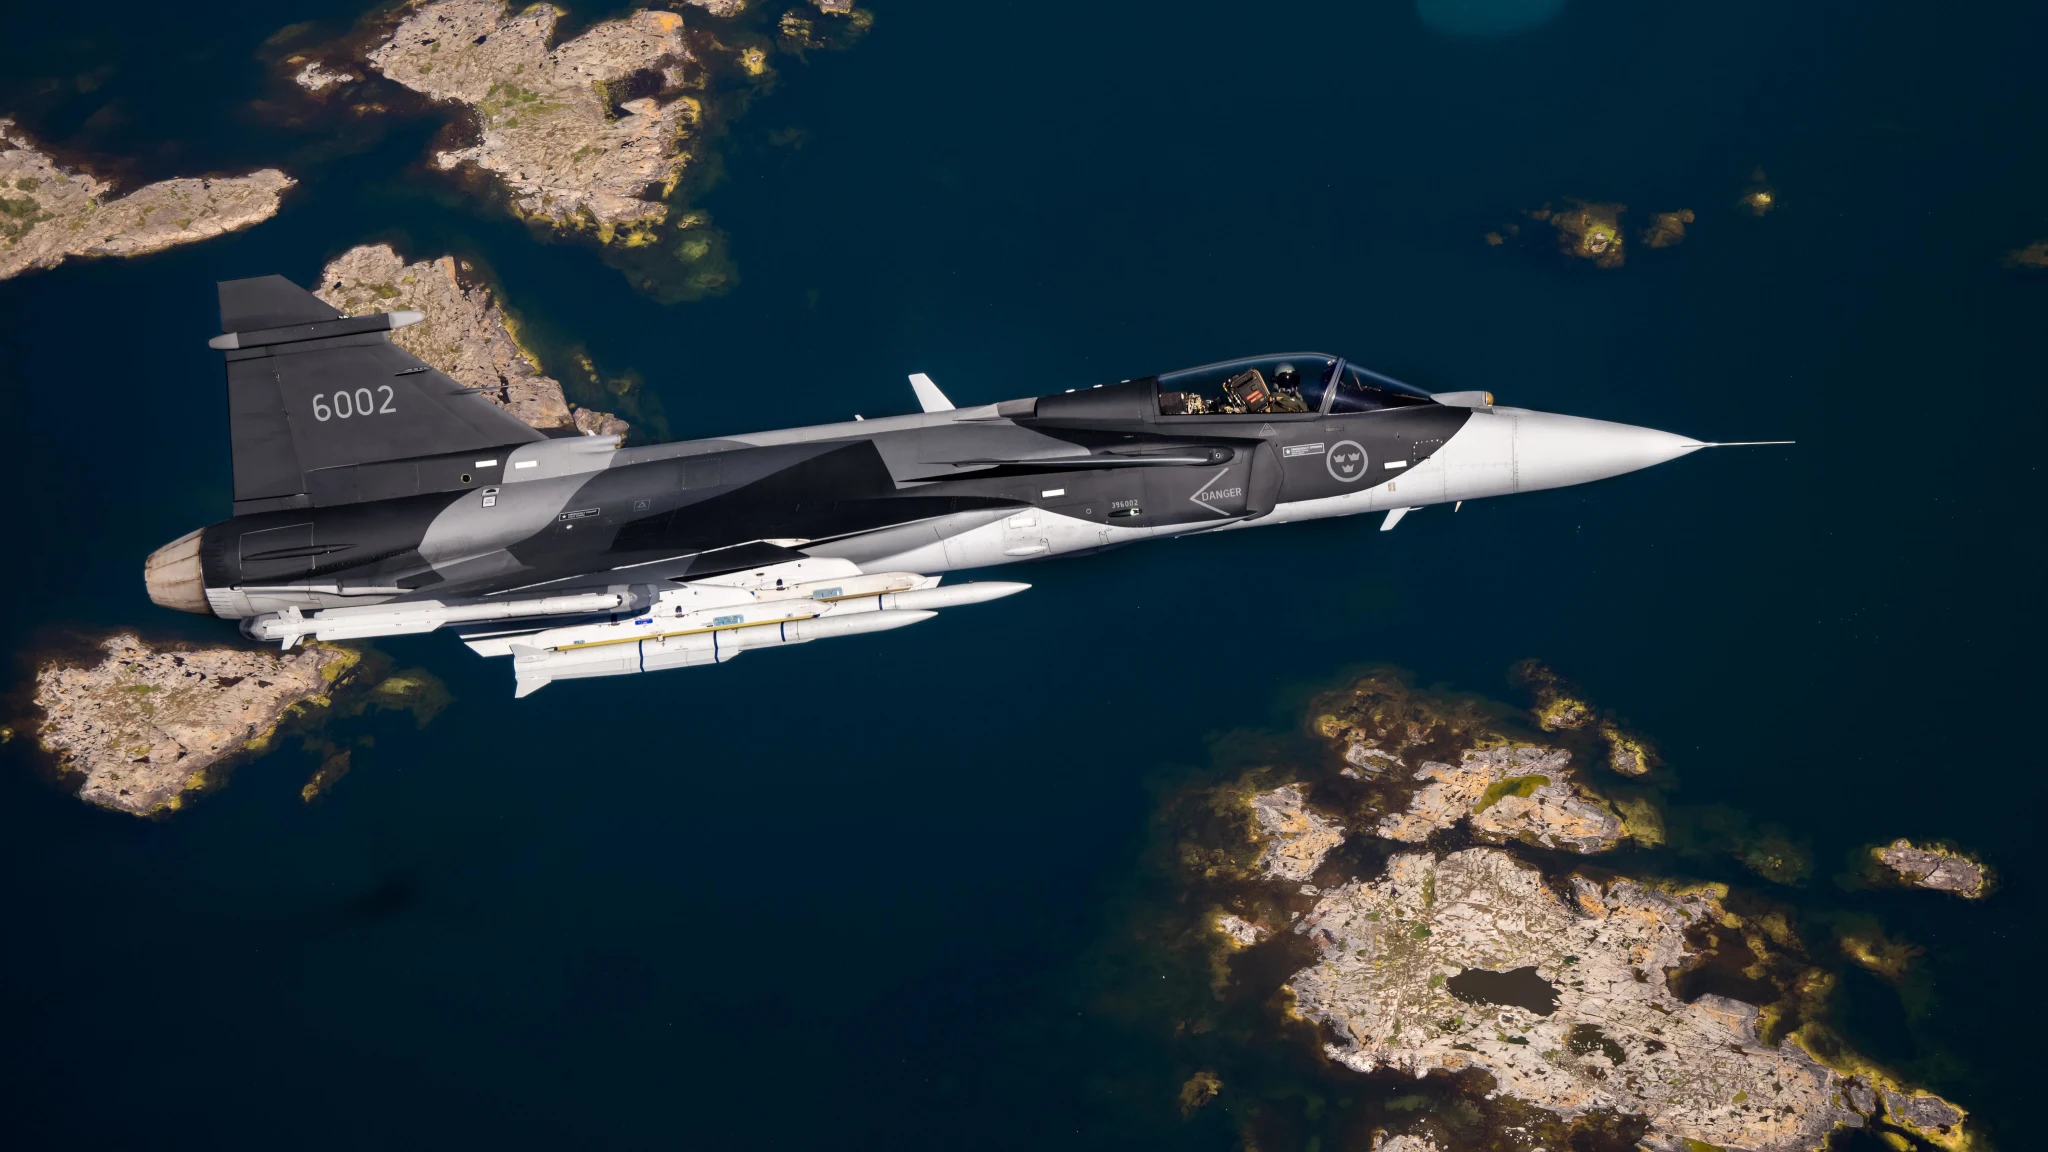 Sweden Test Fires Large No Escape Ramjet Meteor Missiles With Saab Gripen E, F-35s Next?